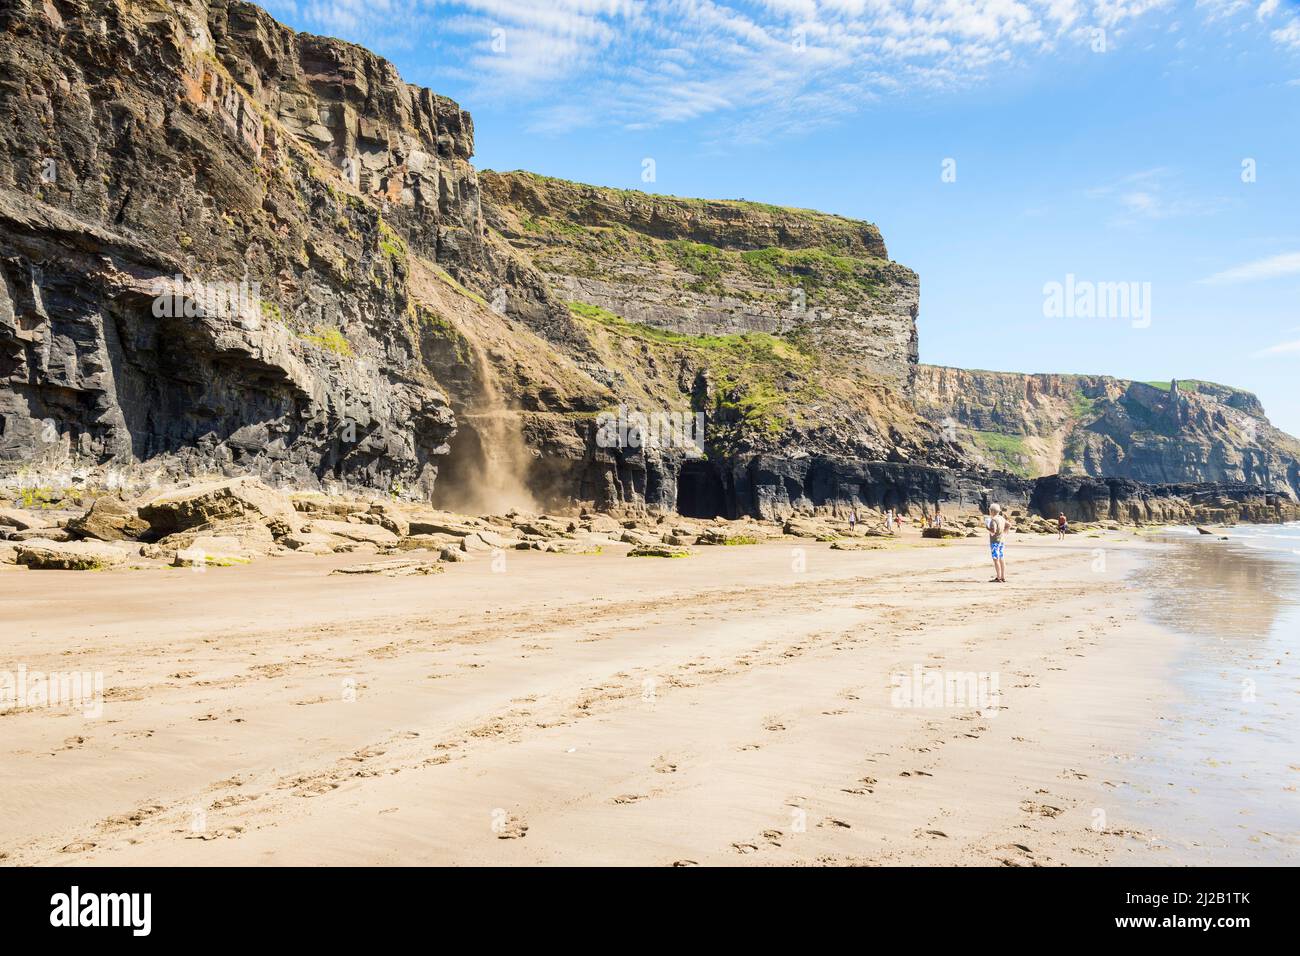 A man watches from the beach as rocks and dirt slide down the cliff face on a bright sunny day at Druidstone in Pembrokeshire, Wales. Stock Photo